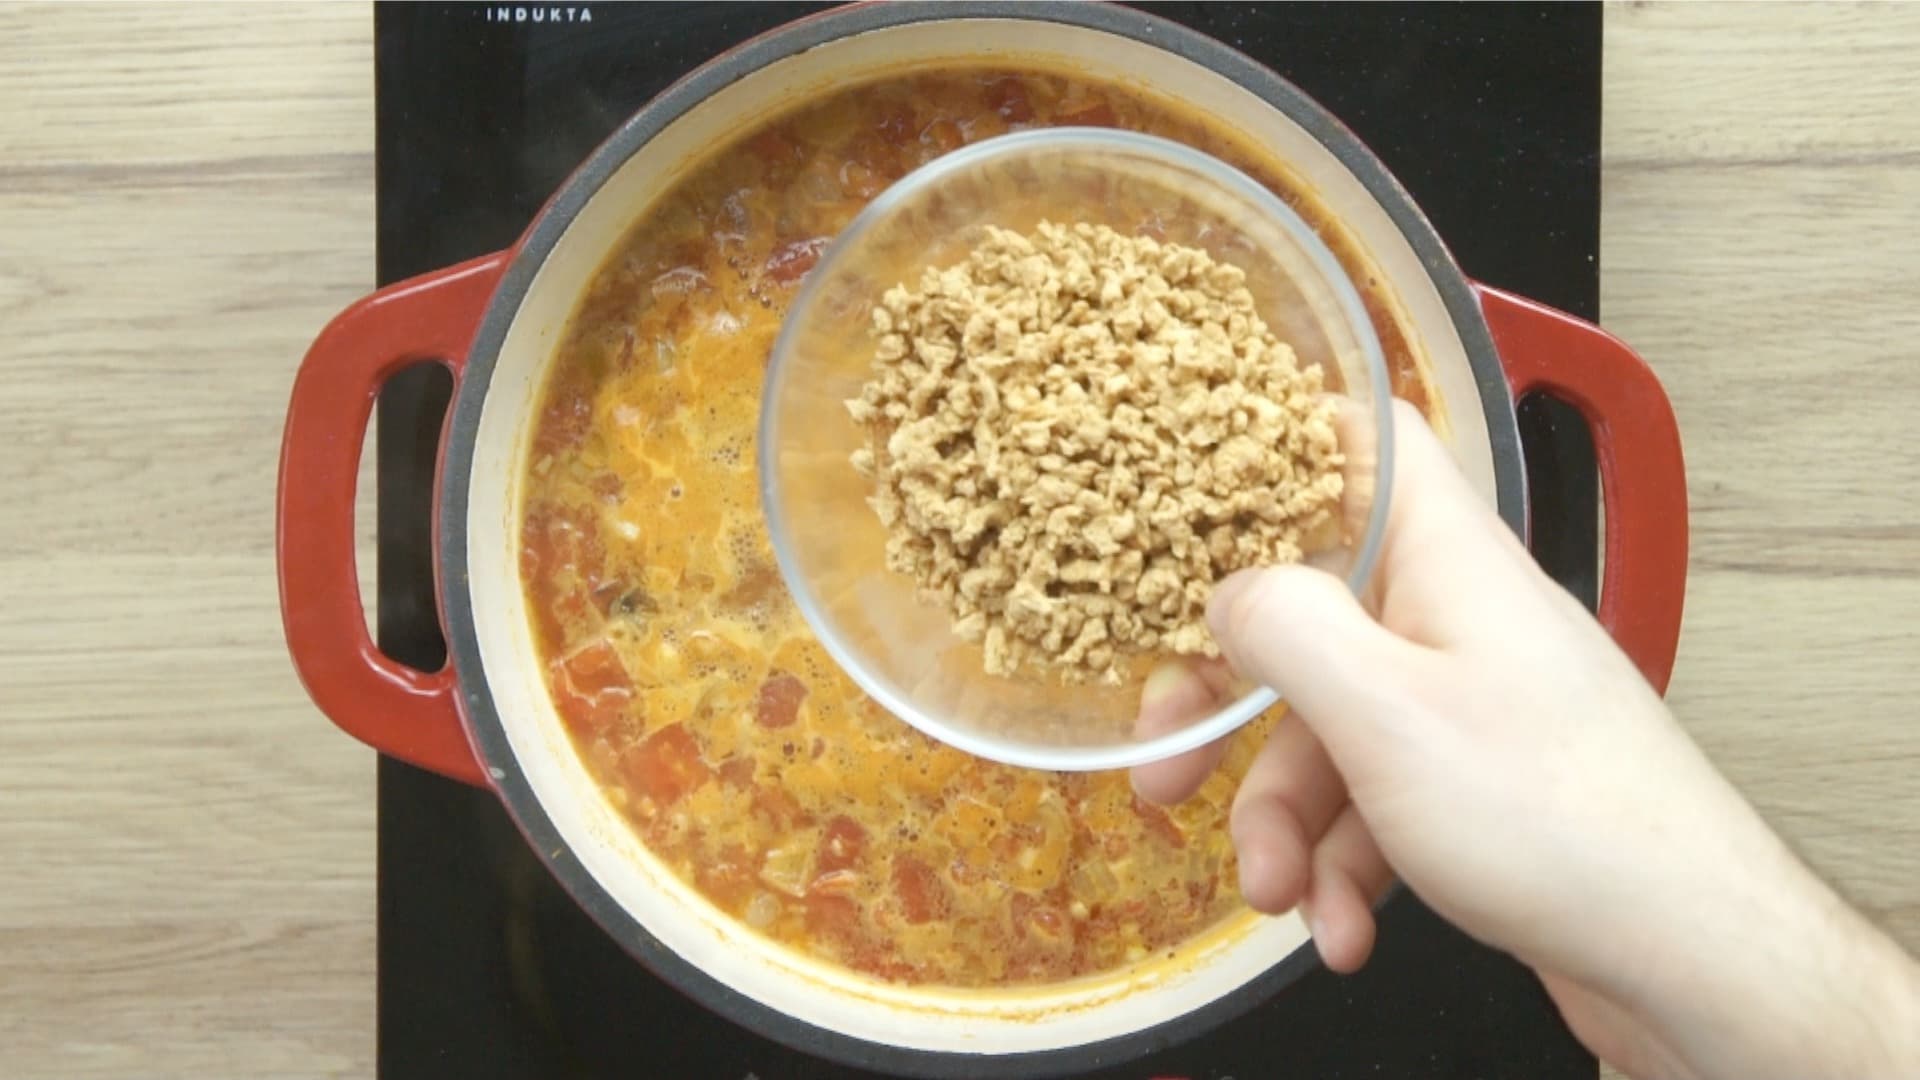 A hand is holding a bowl of crumbles to be added to a tomato colored soup below.